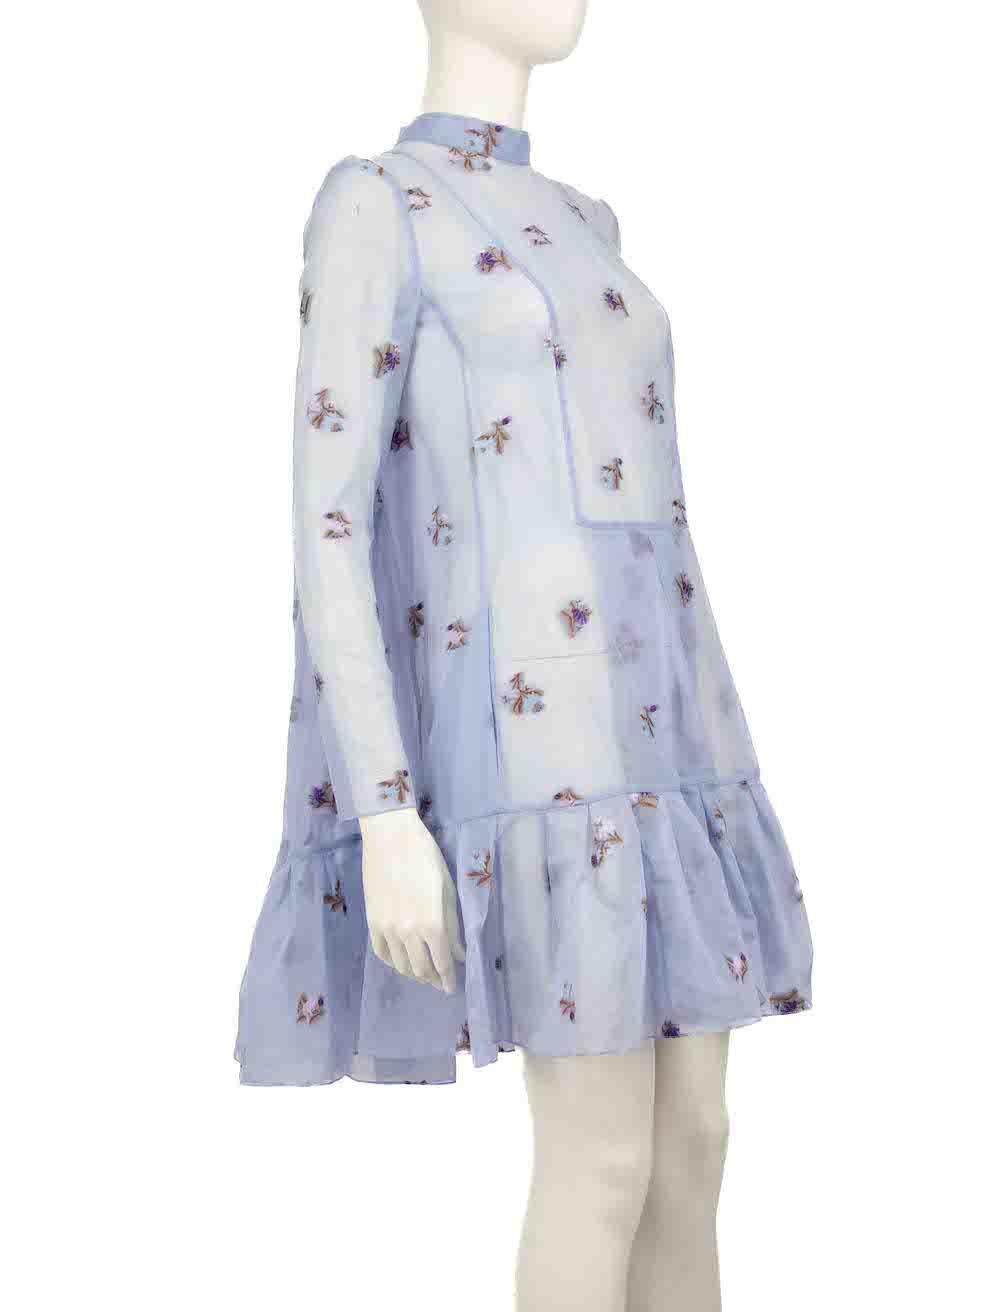 CONDITION is Never worn, with tags. No visible wear to dress is evident on this new Erdem designer resale item.
 
 
 
 Details
 
 
 Model: Cosima
 
 Blue
 
 Cotton
 
 Mini dress
 
 Sheer
 
 Floral embroidered accent
 
 Mock neckline
 
 2x Front side